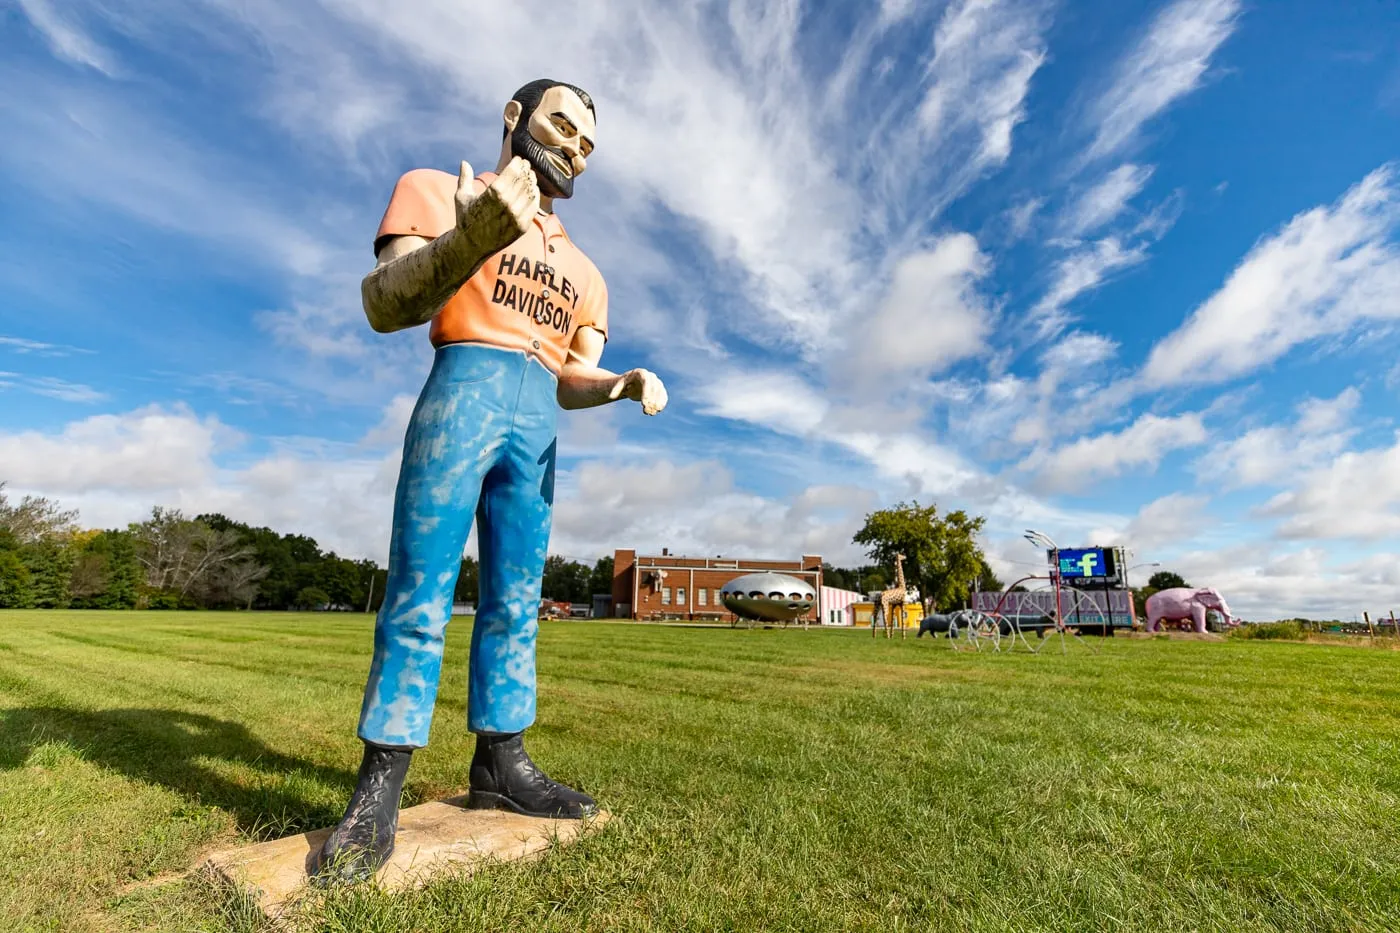 Harley-Davidson muffler man at the Pink Elephant Antique Mall in Livingston, Illinois - Route 66 Roadside Attraction